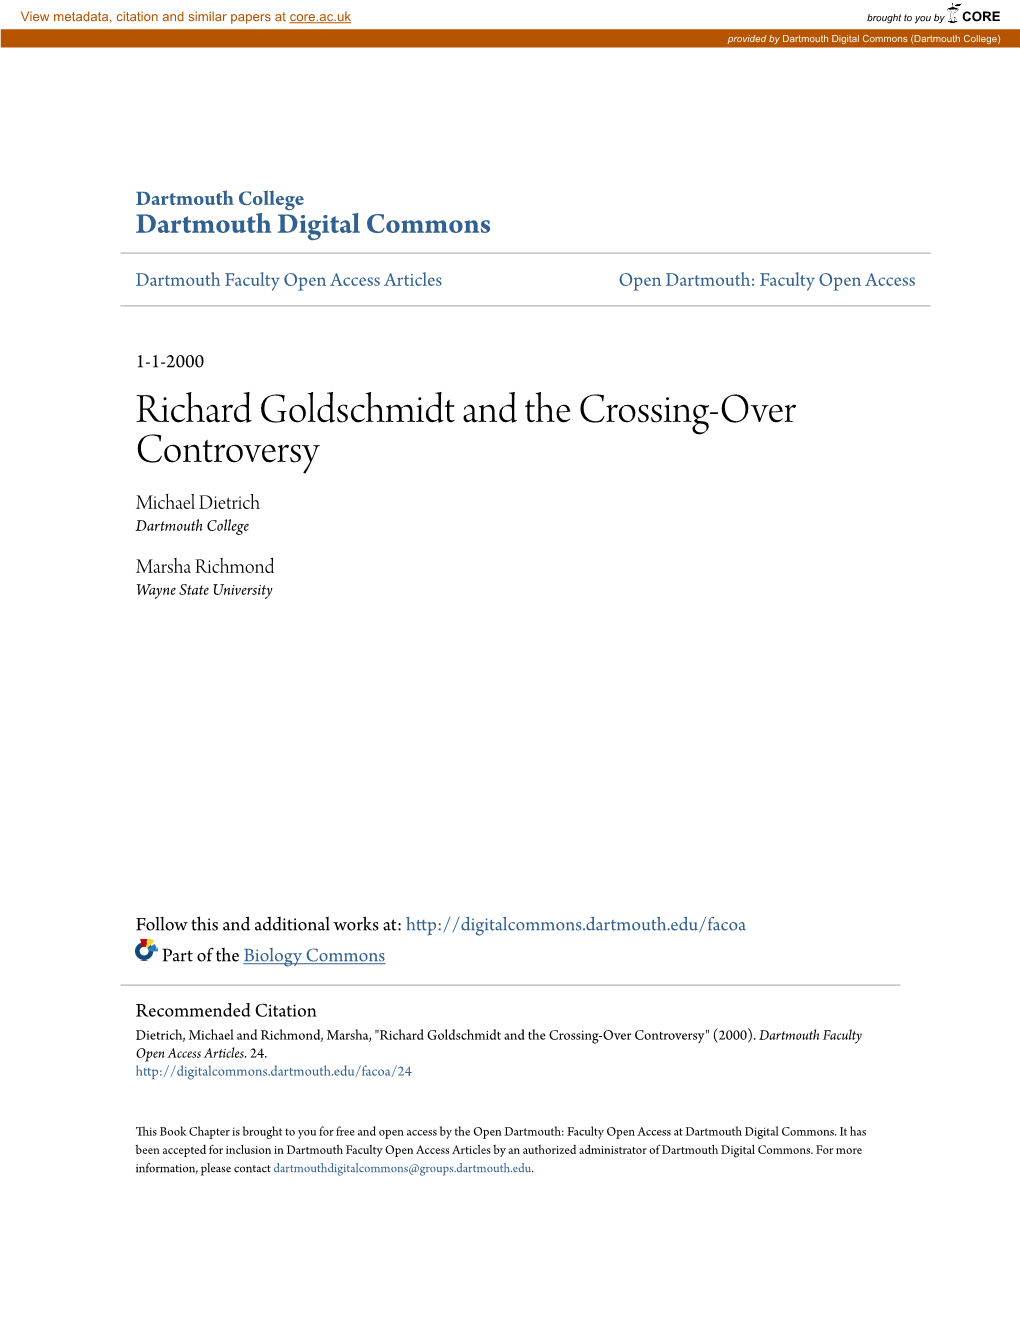 Richard Goldschmidt and the Crossing-Over Controversy Michael Dietrich Dartmouth College